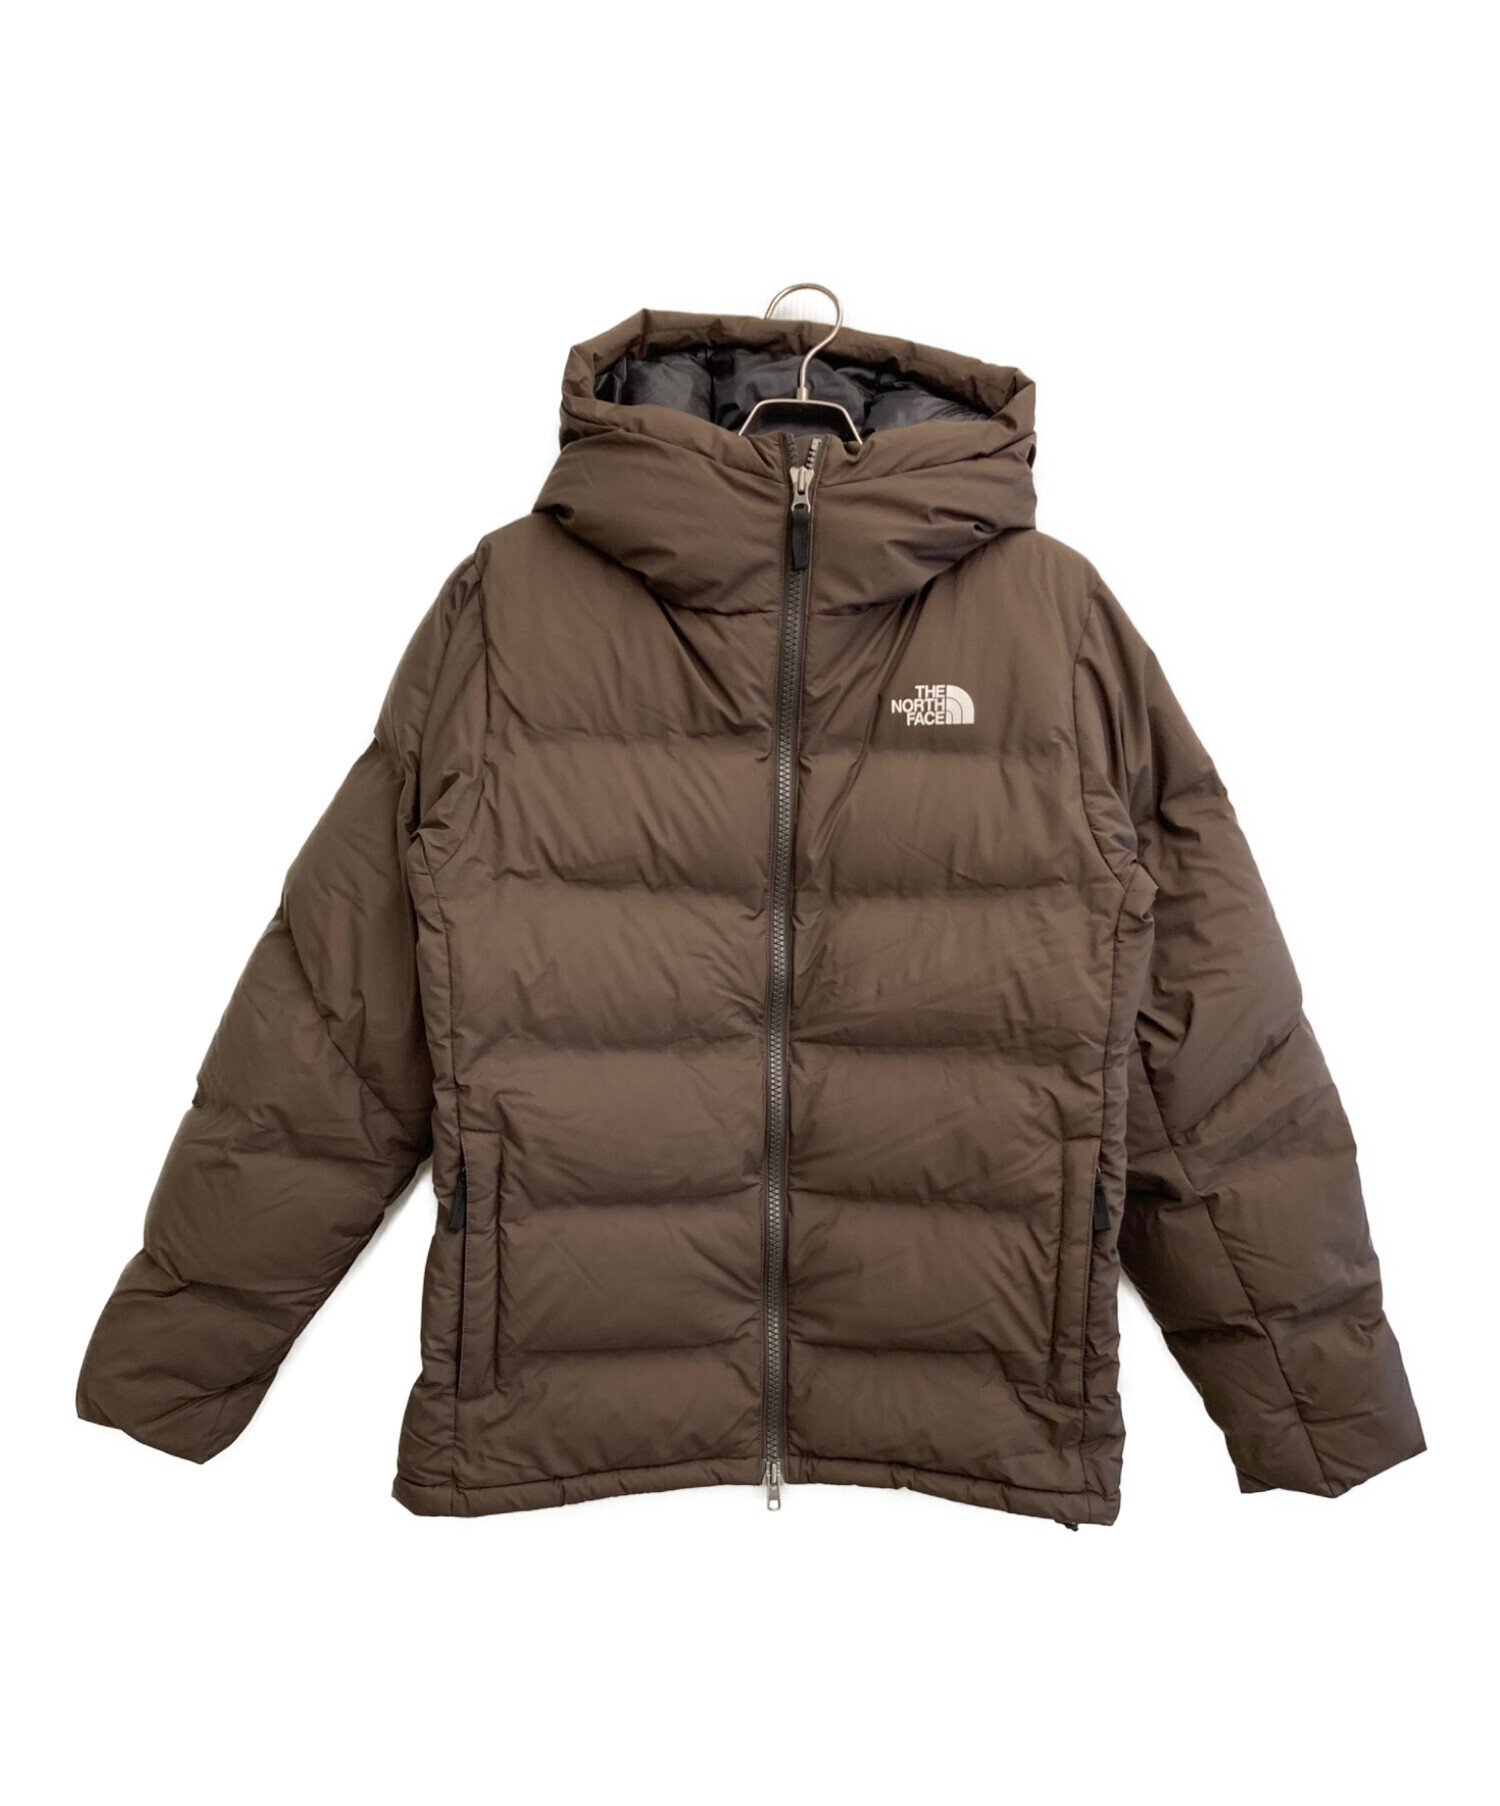 THE NORTH FACE Belayer Parka  サイズS